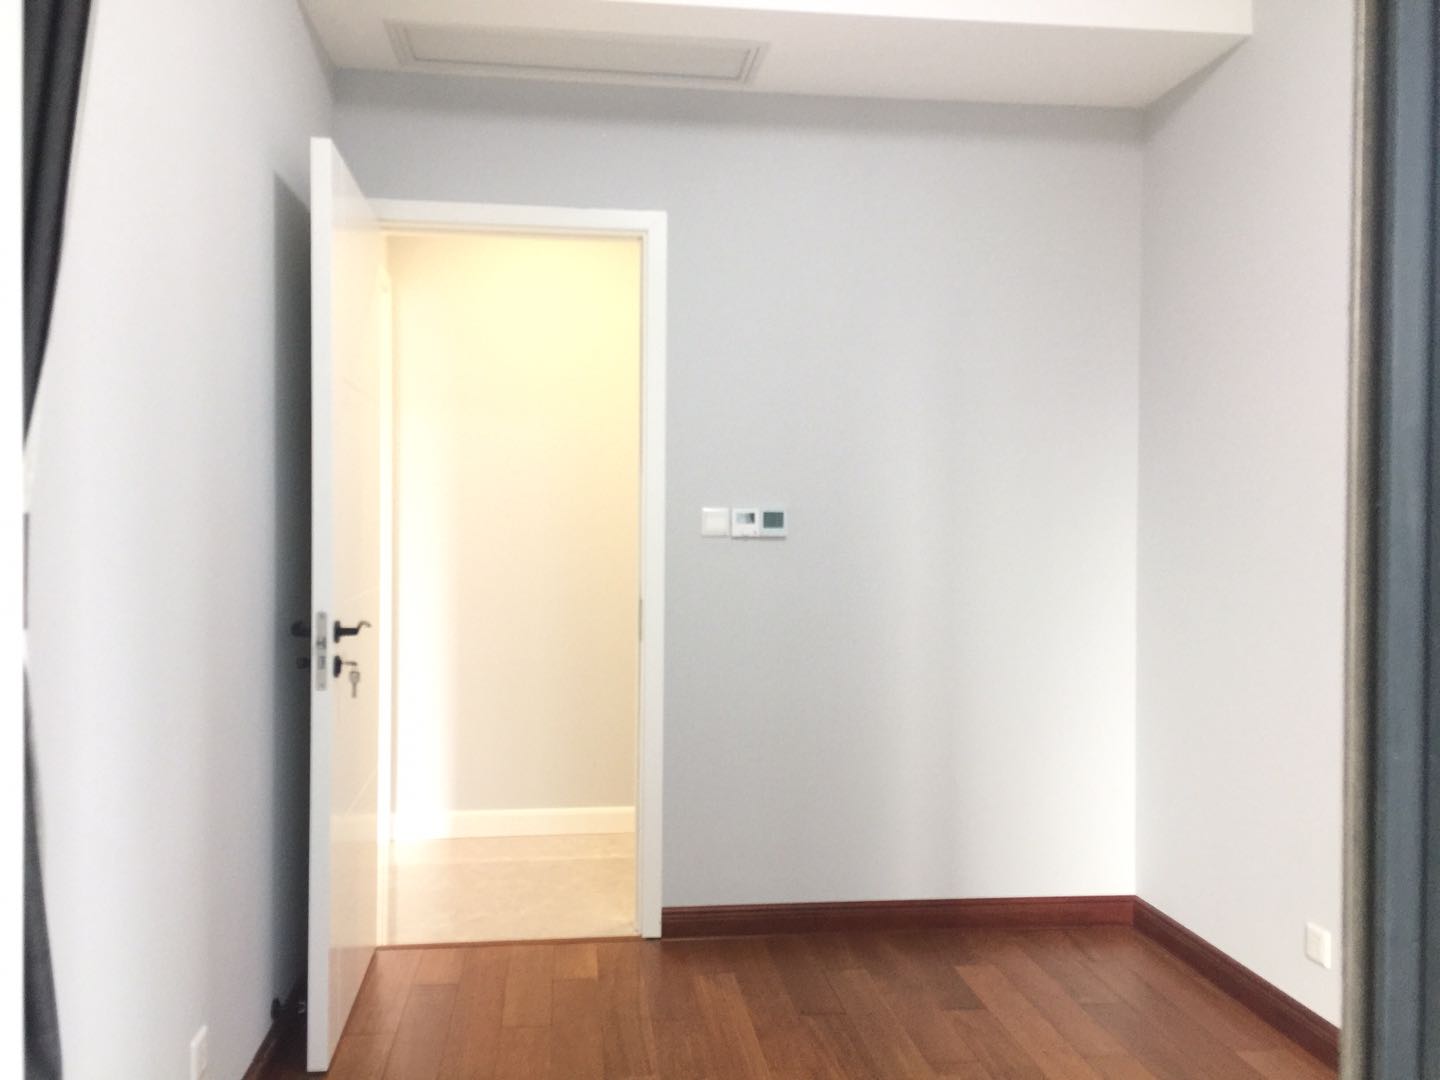 new room Brand-new Spacious LJZ CBD Apartment for Rent in Shanghai